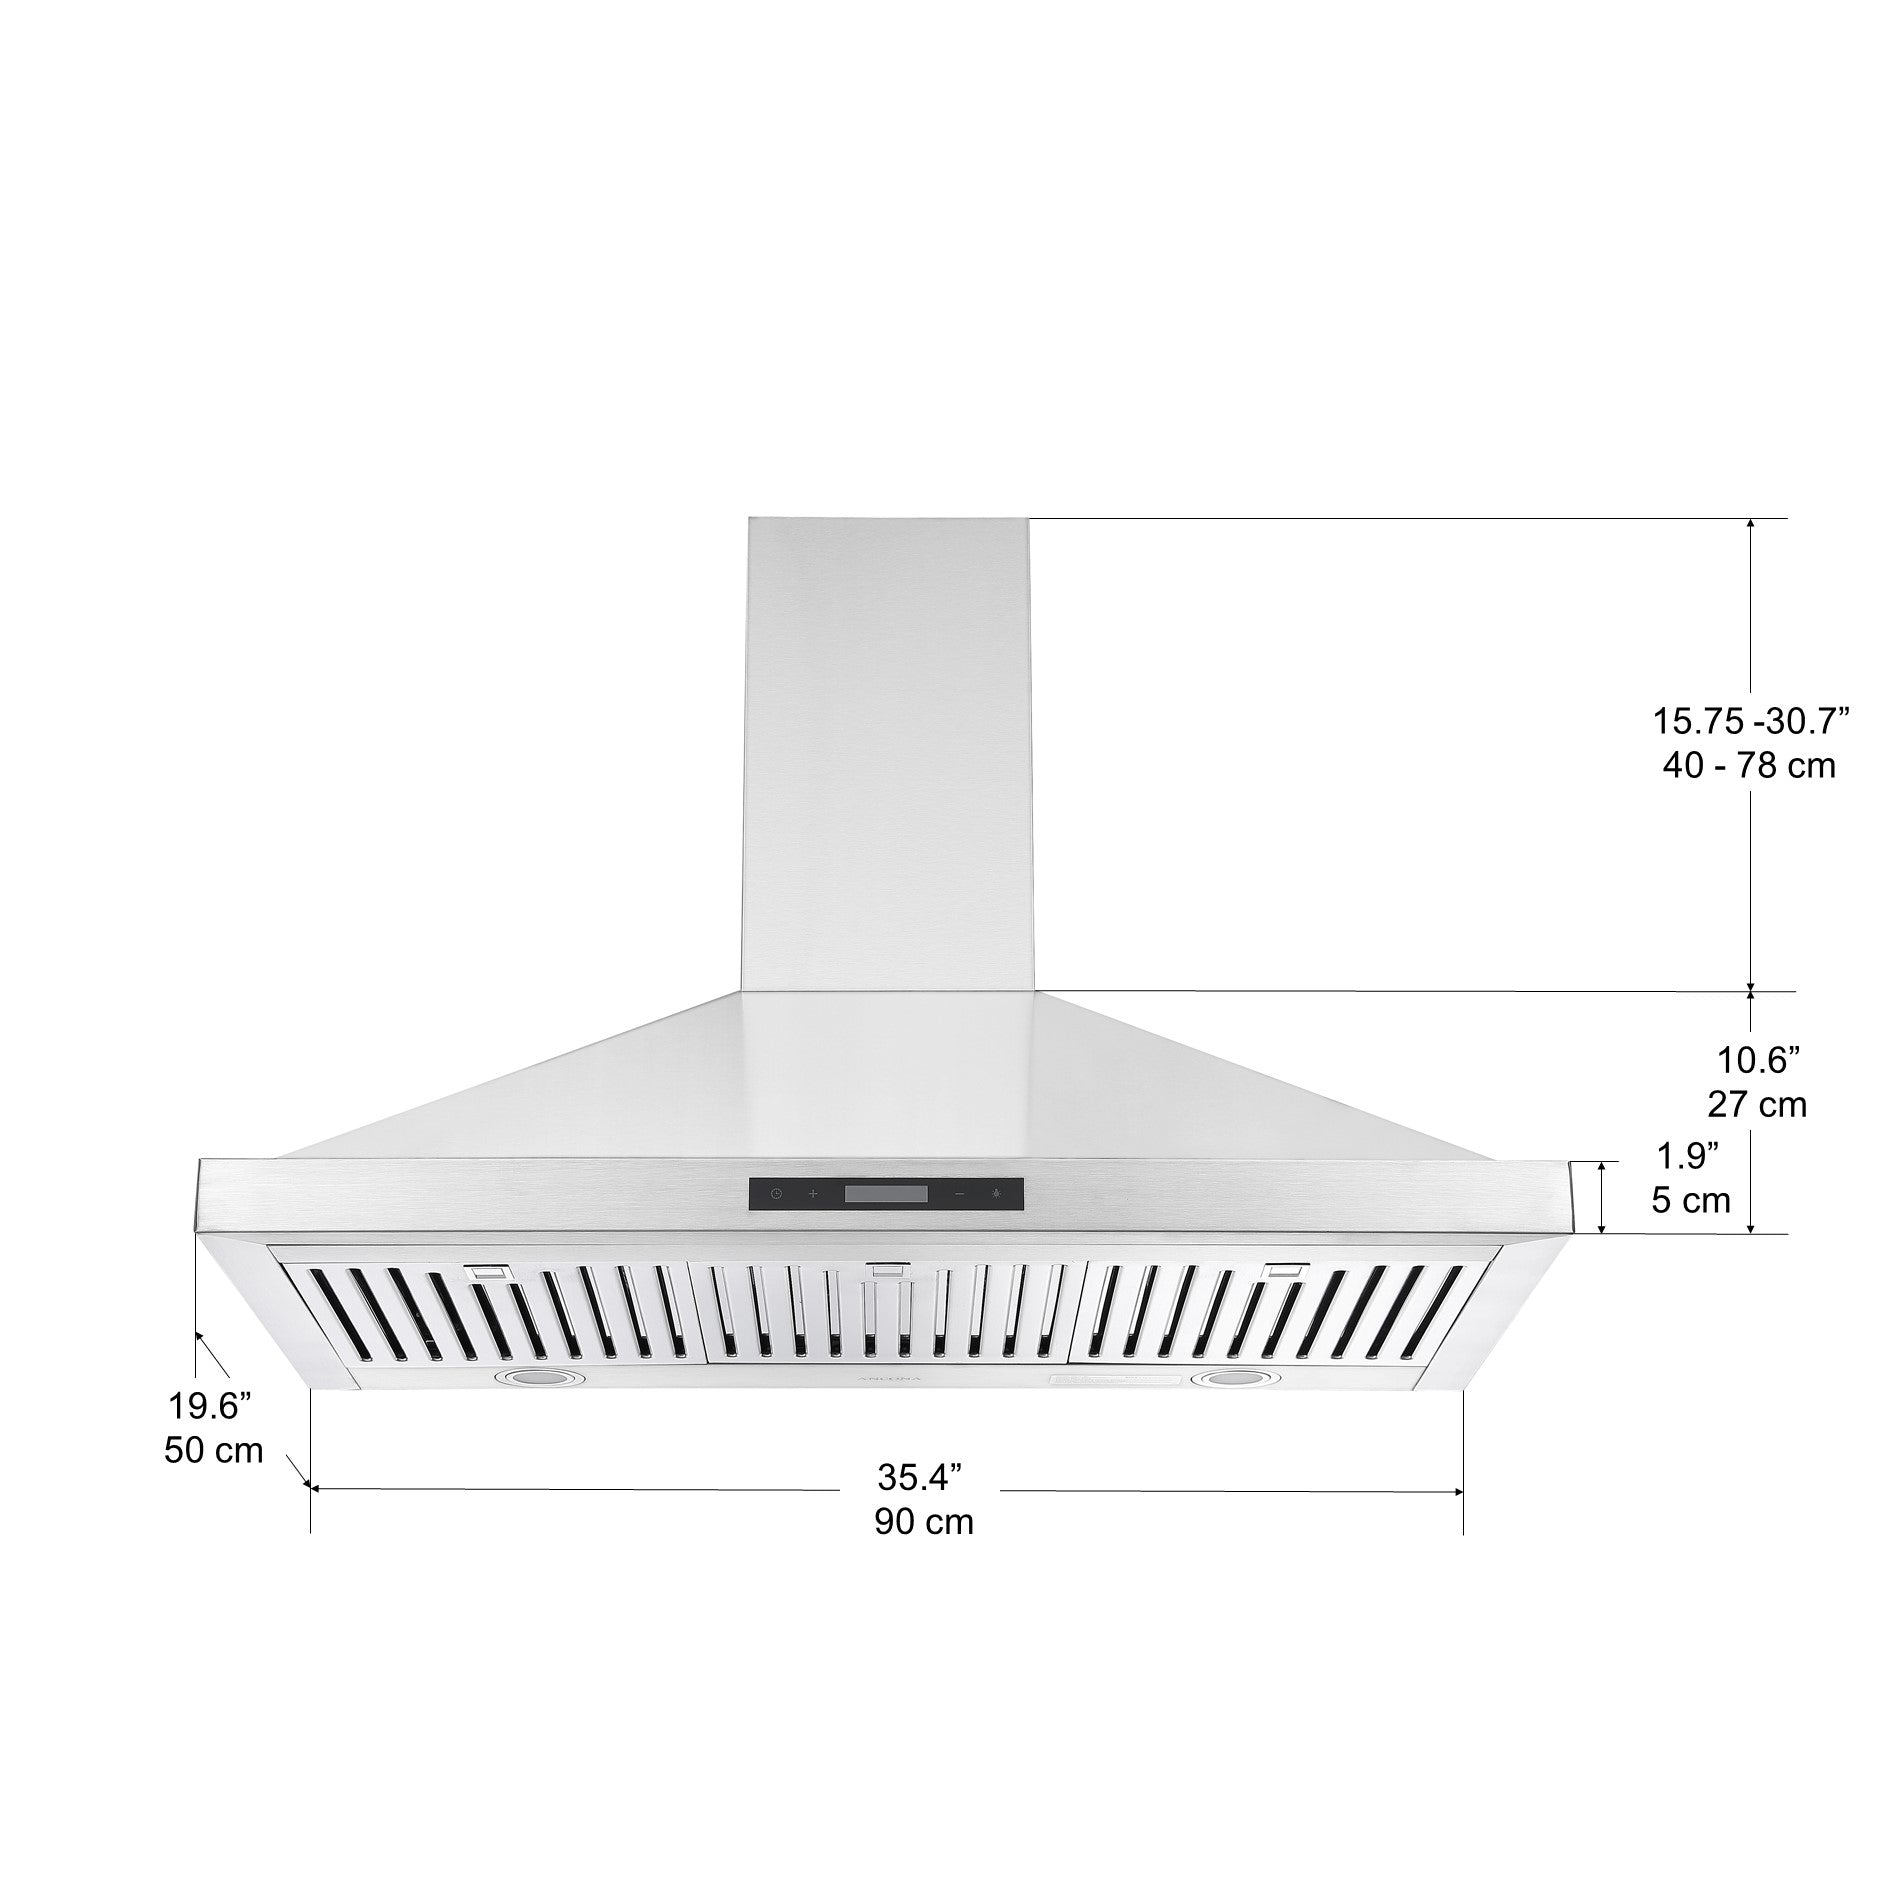 WPB636 36 in. Wall Mount Pyramid Range Hood in Stainless Steel